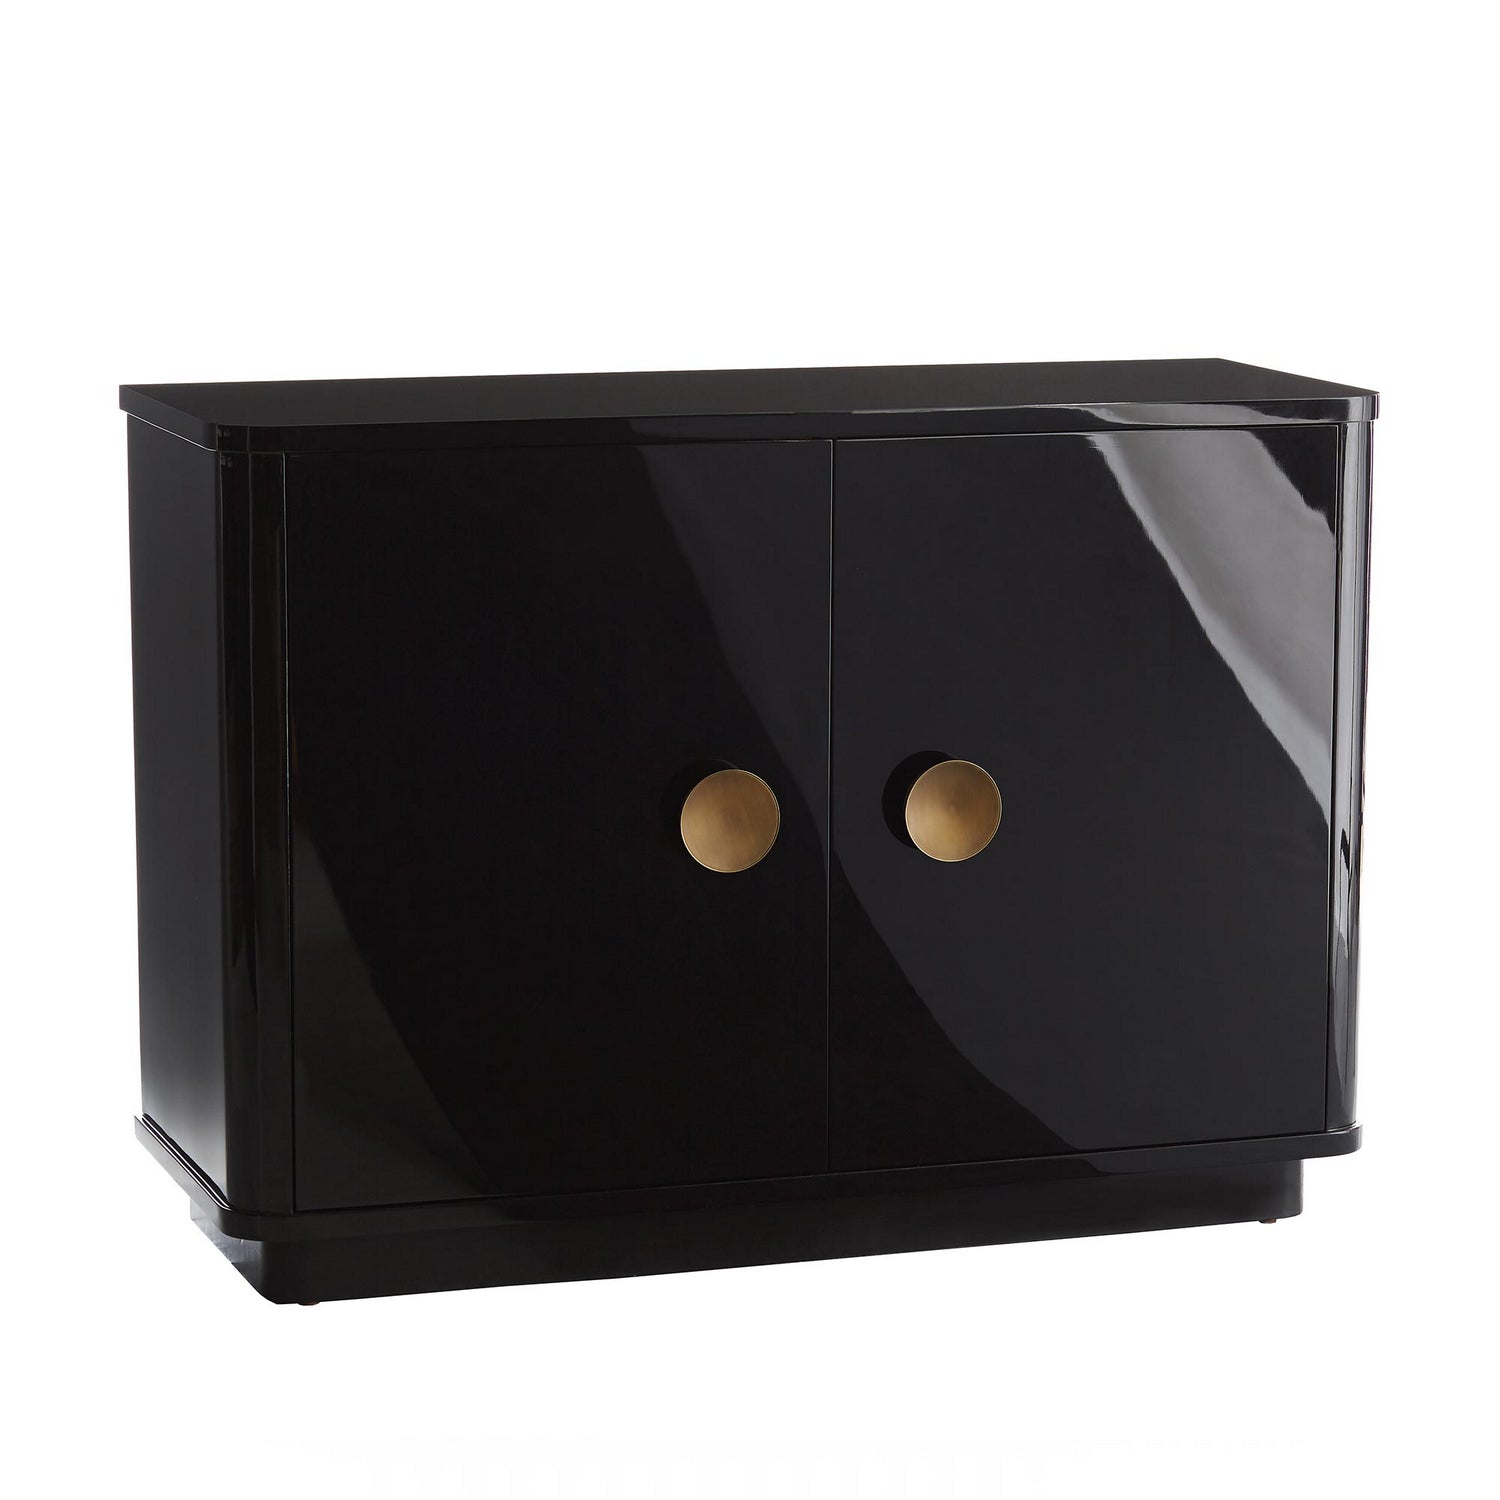 Chest from the Kennedy collection in High Gloss Black Lacquer finish